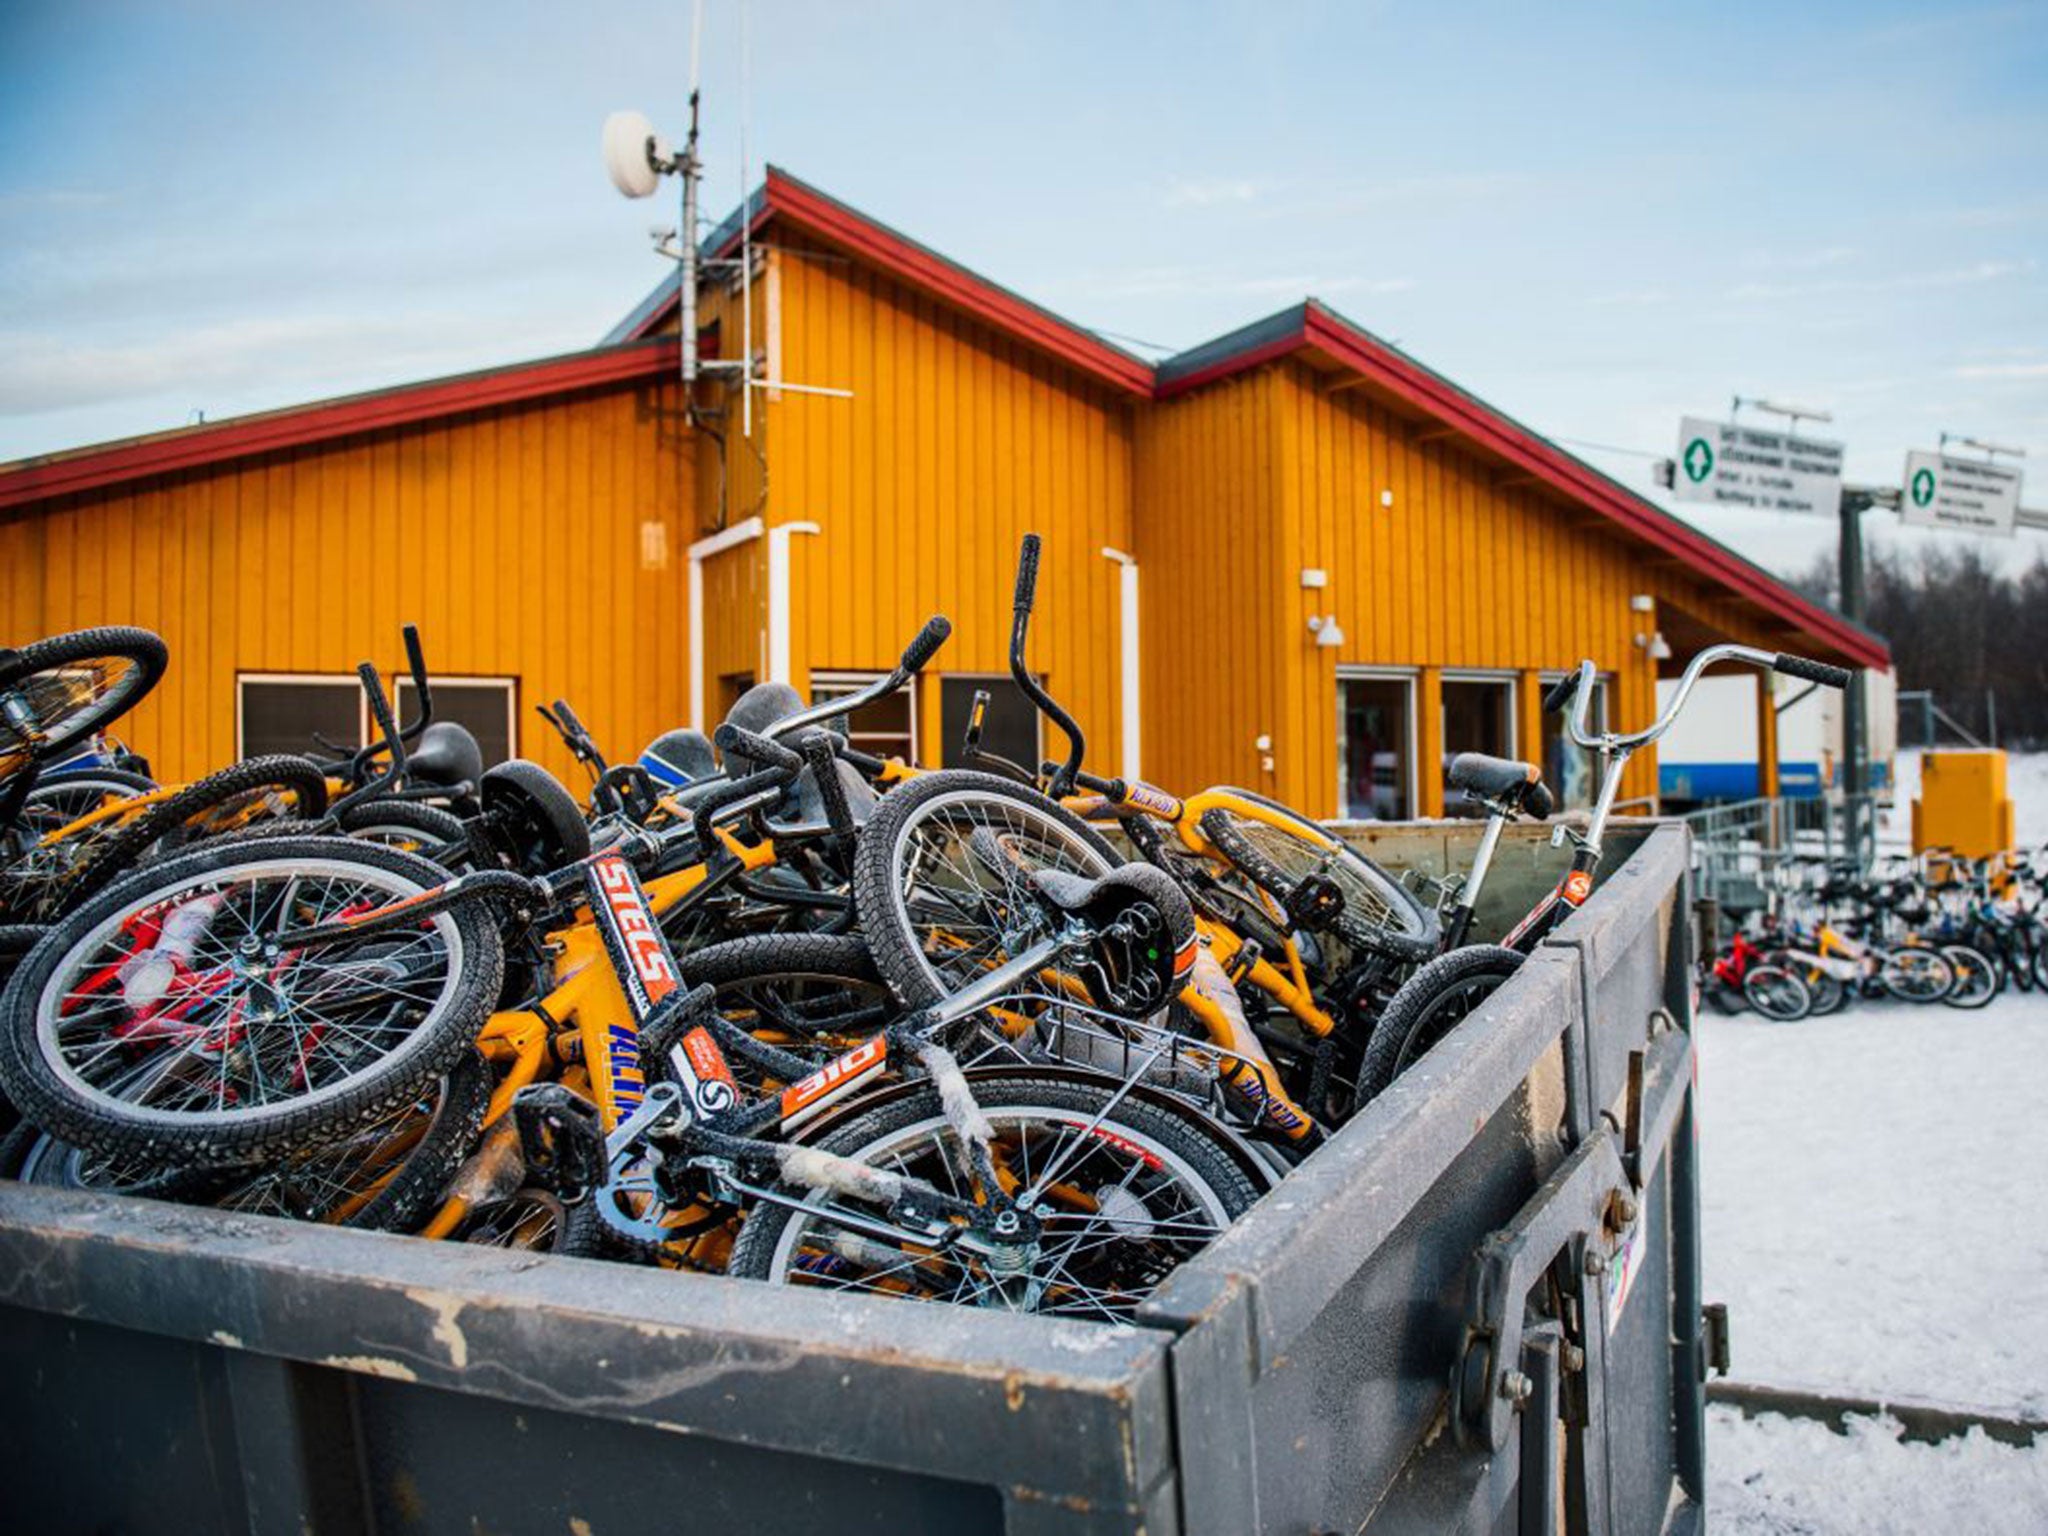 Most of the cycles were abandoned upon entry to Norway